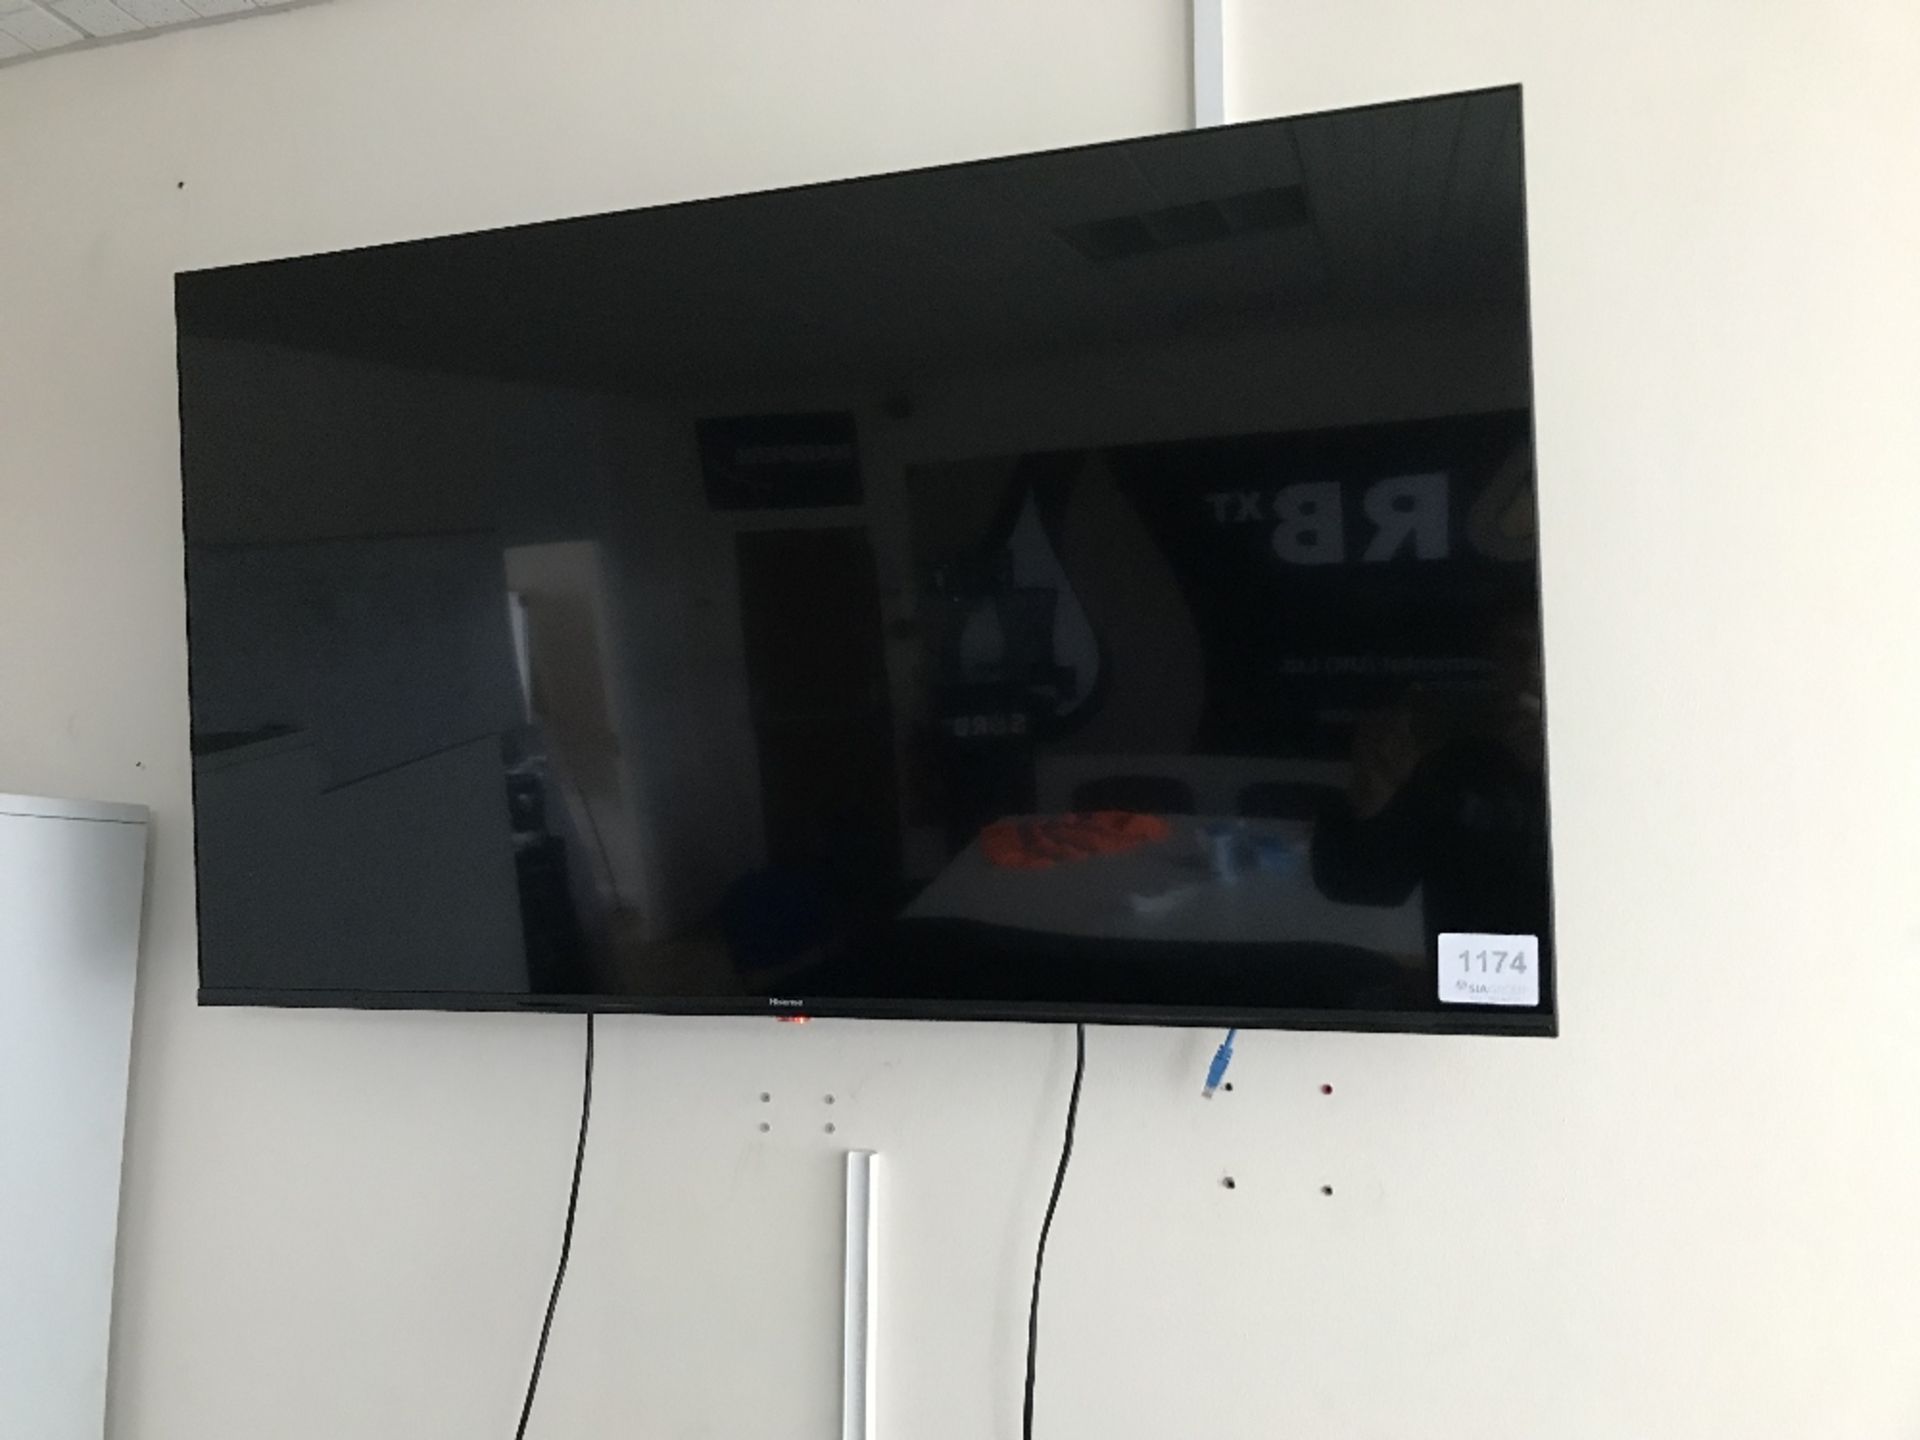 Hisense Approximately 50Inch Television With Wall Mounted Bracket, Remote, HDMI Cables